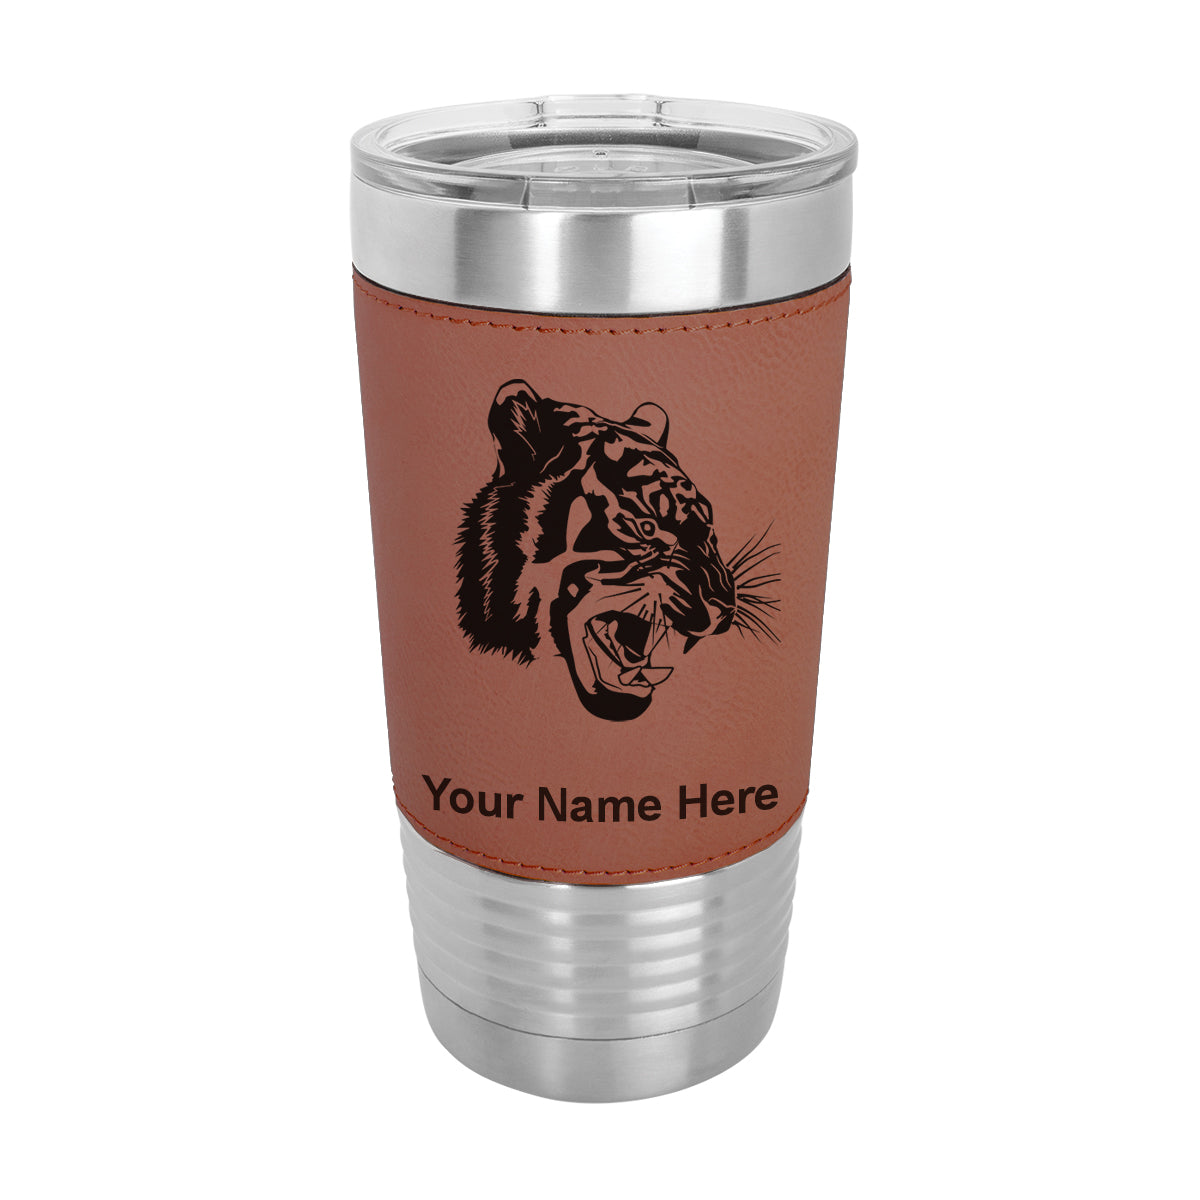 20oz Faux Leather Tumbler Mug, Tiger Head, Personalized Engraving Included